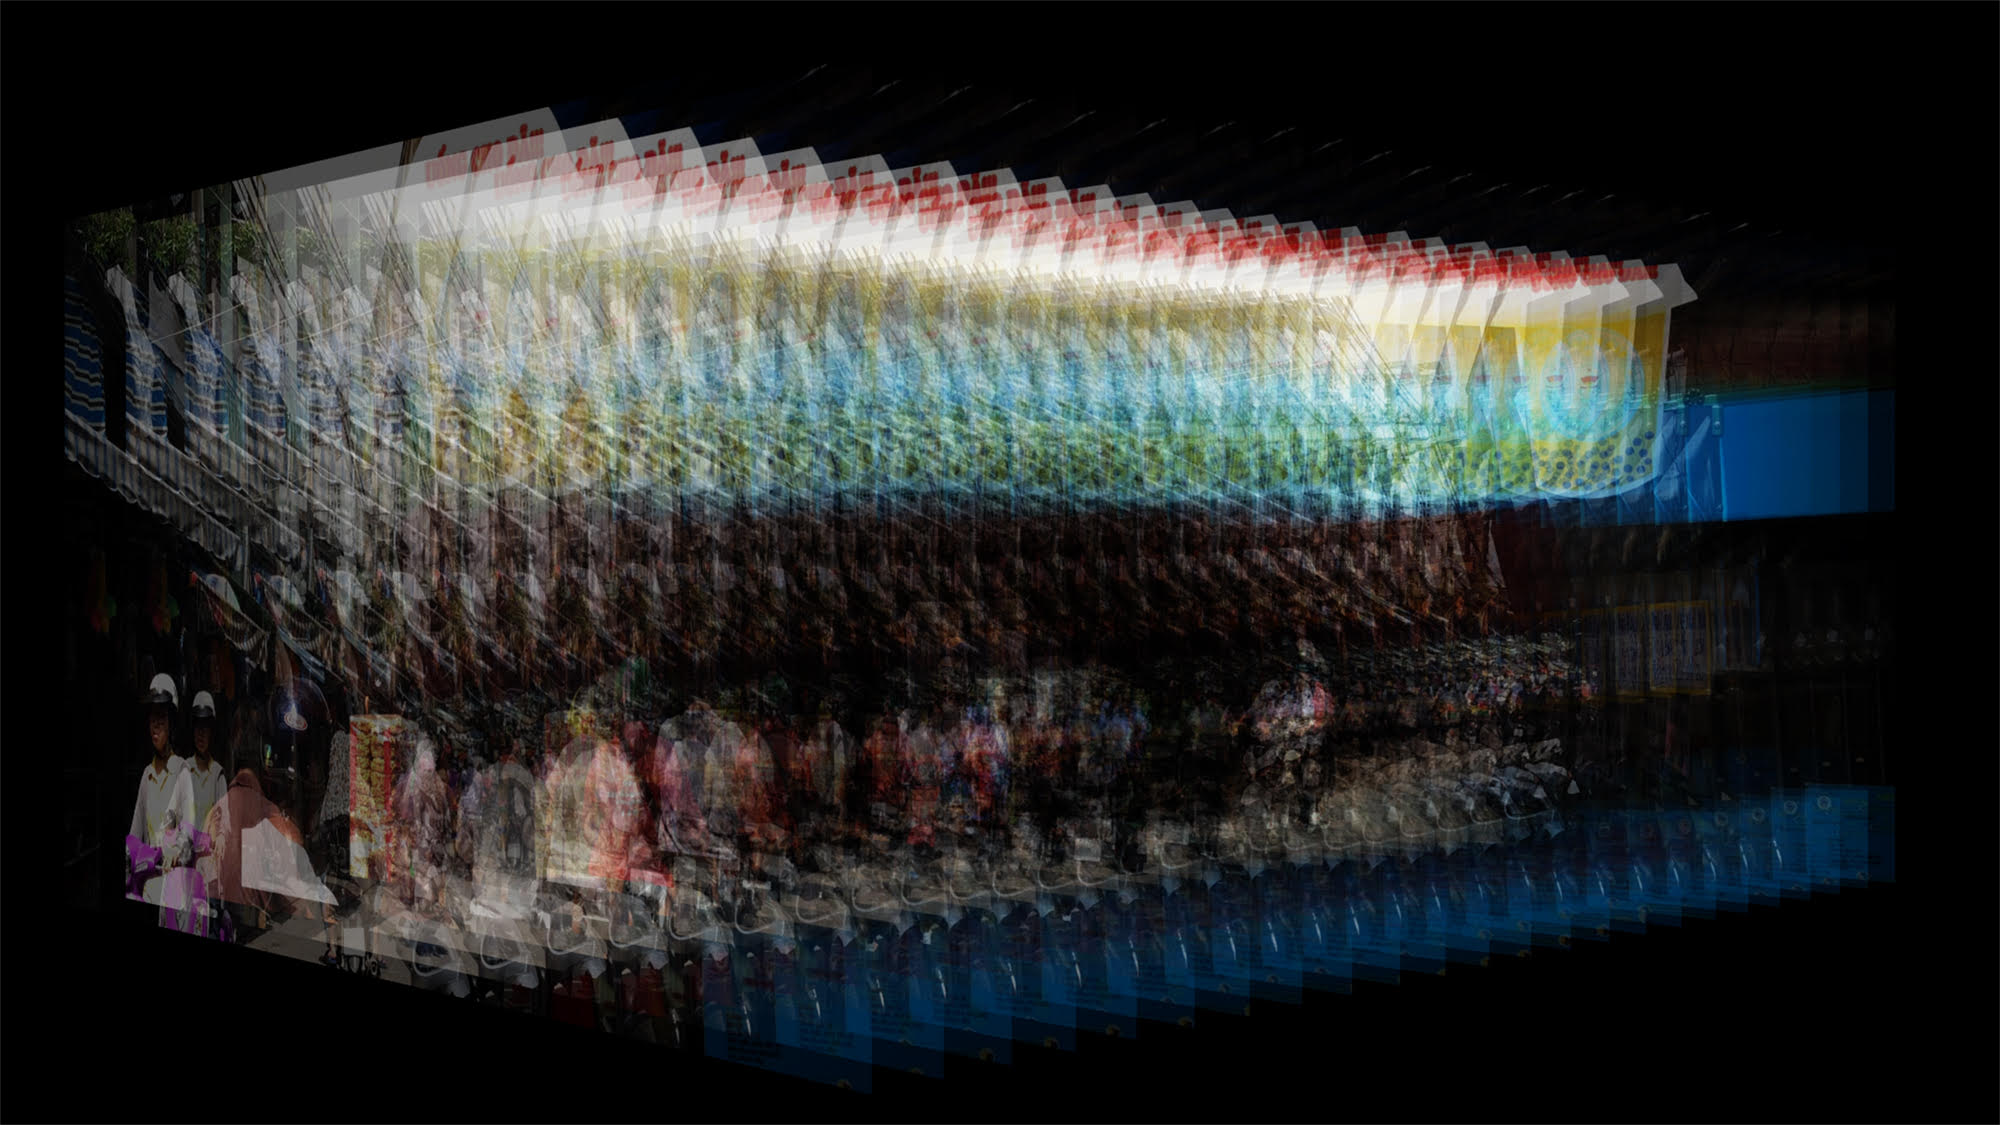 This image shows a market street in District 4. Frames are taken from a moving image sequence and placed one after the other, creating a film block. This technique allows for the sequence to be seen in one picture and reveals which elements in the space remain static and which are moving.